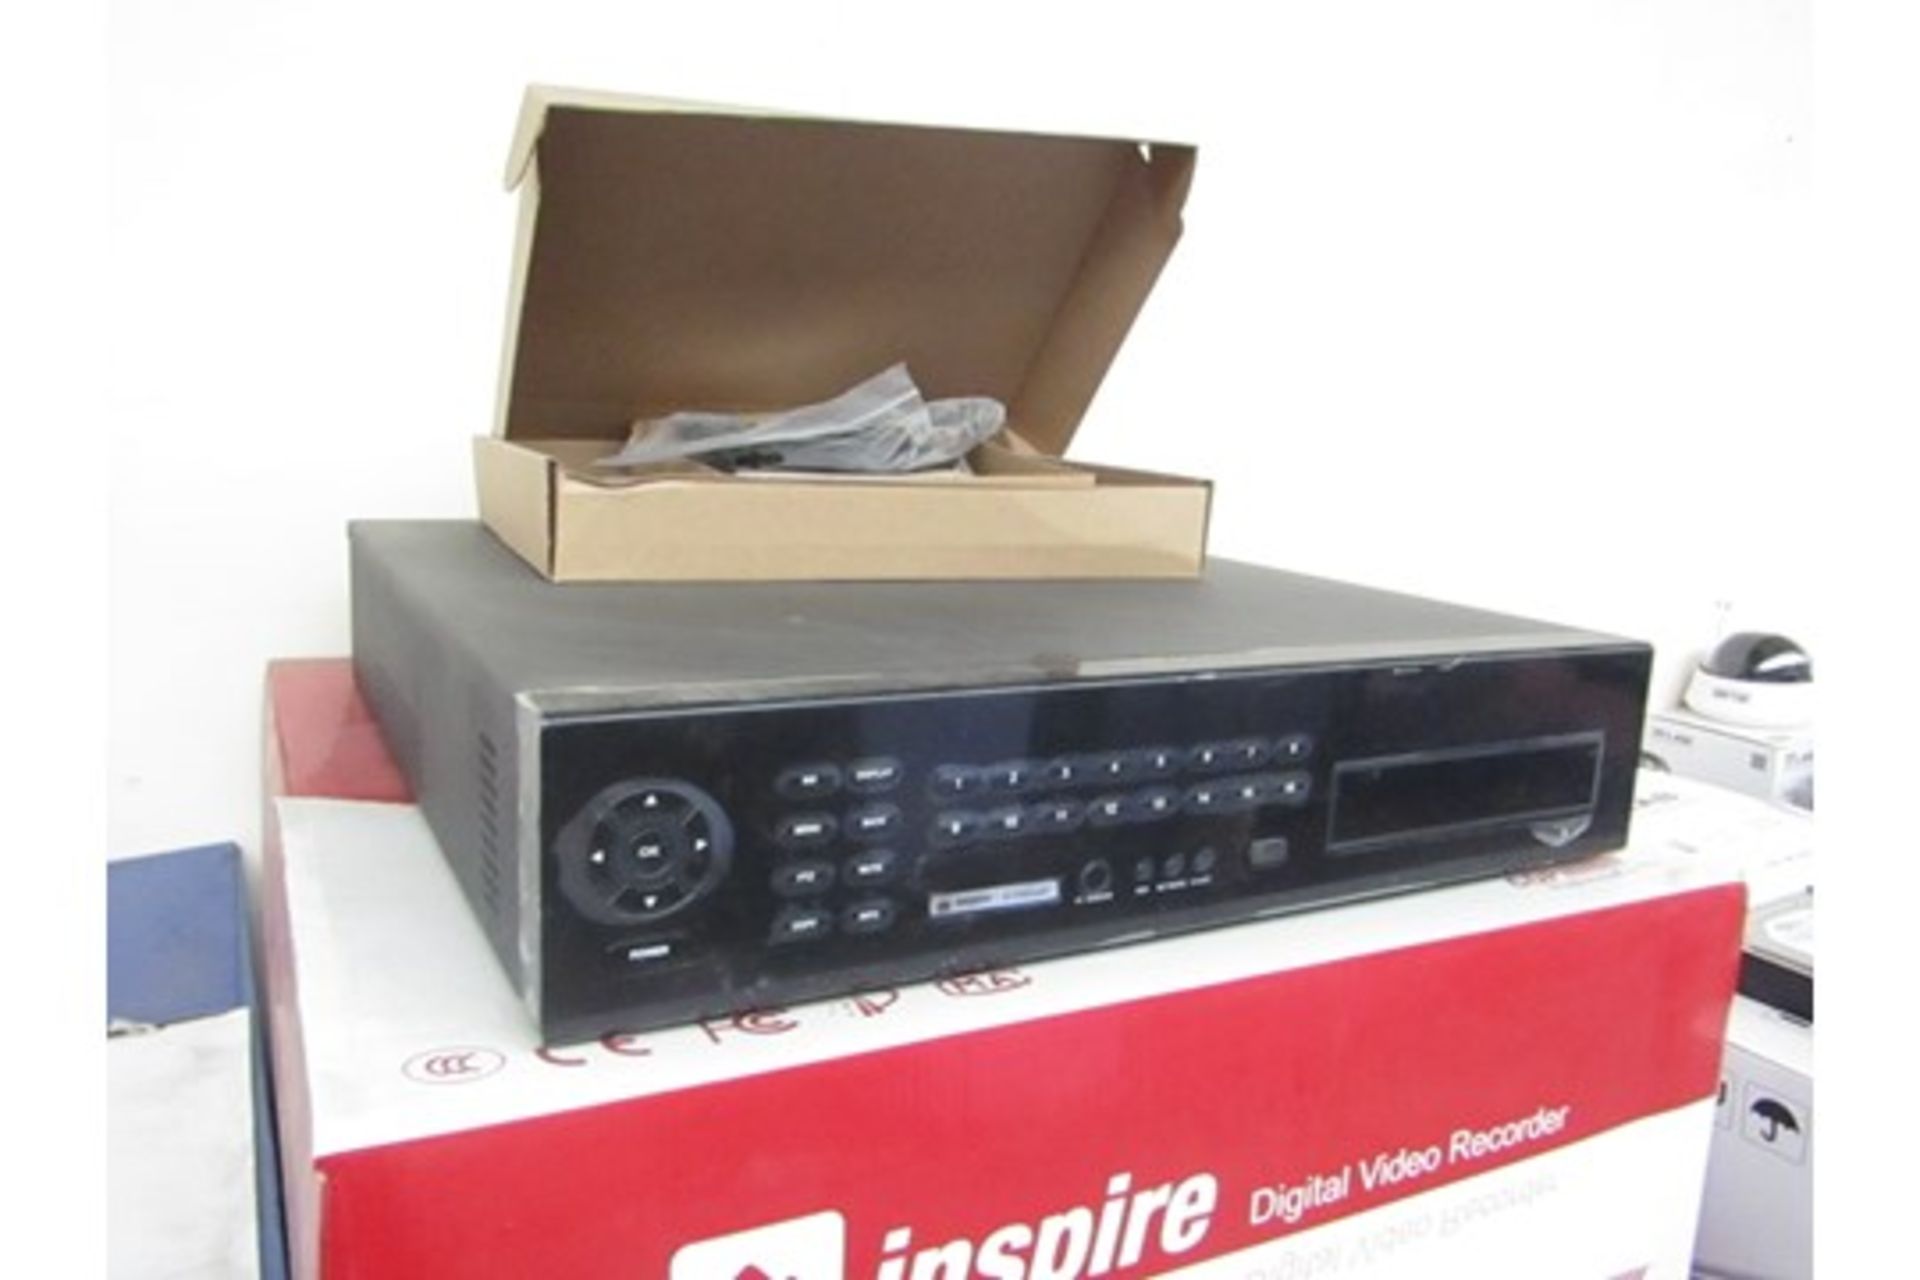 Full high end professional CCTV camera system! Contains: Cop Security Inspire 8 channel digital - Image 2 of 2